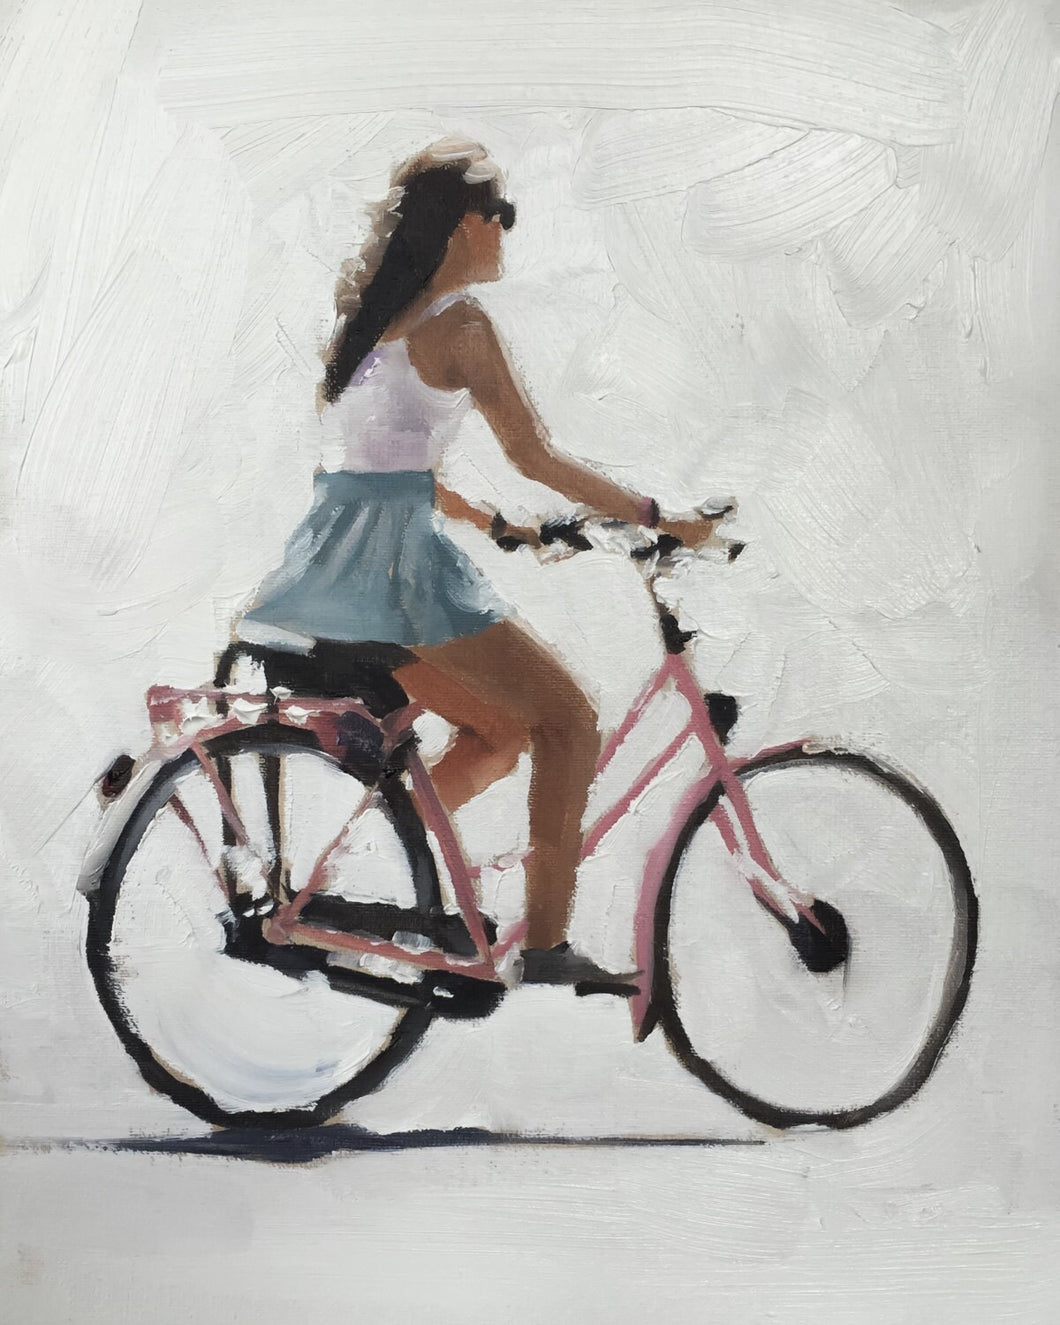 Girl Cycling Painting, Prints, Posters, Originals, Commissions - Fine Art - from original oil painting by James Coates